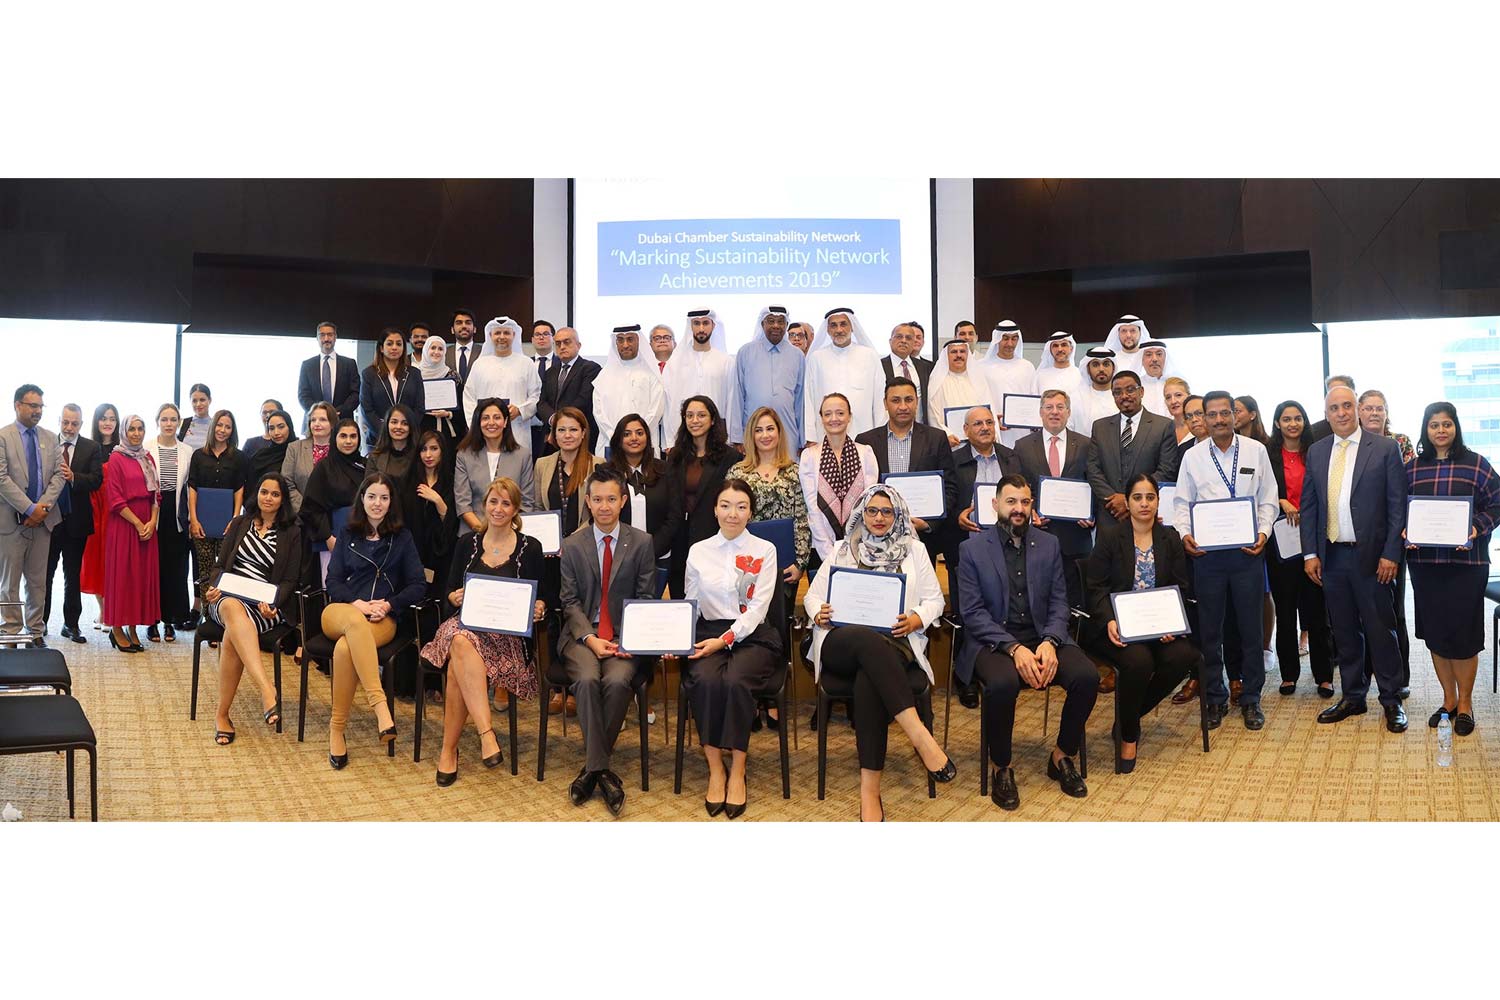 Dubai Chamber Recognizes ASGC for its Workforce Corporate Social Responsibility